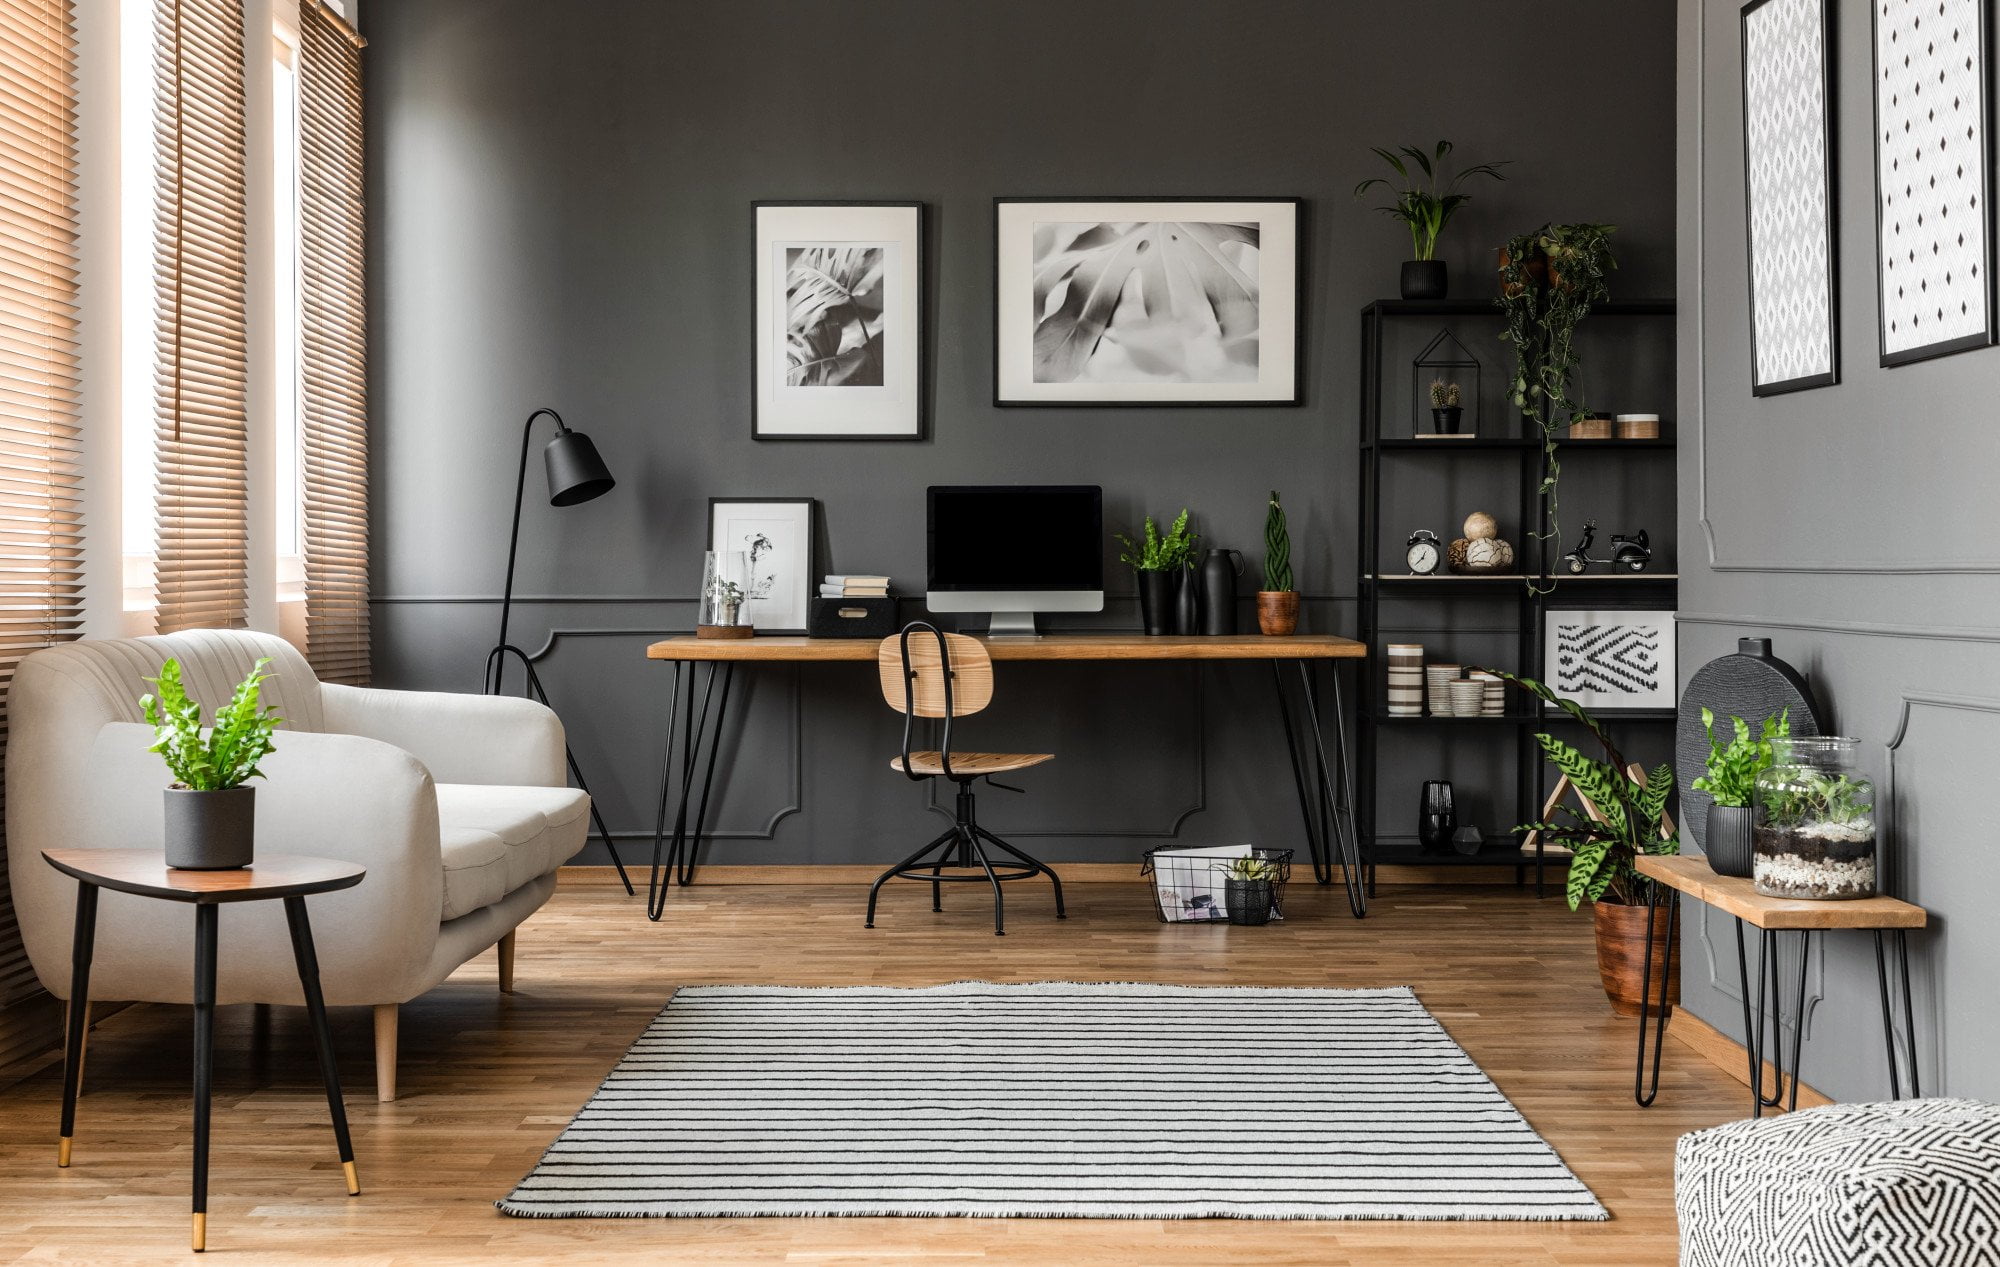 If you want your home office remodel to go smoothly, there are several things you need to do. This guide has our greatest tips.